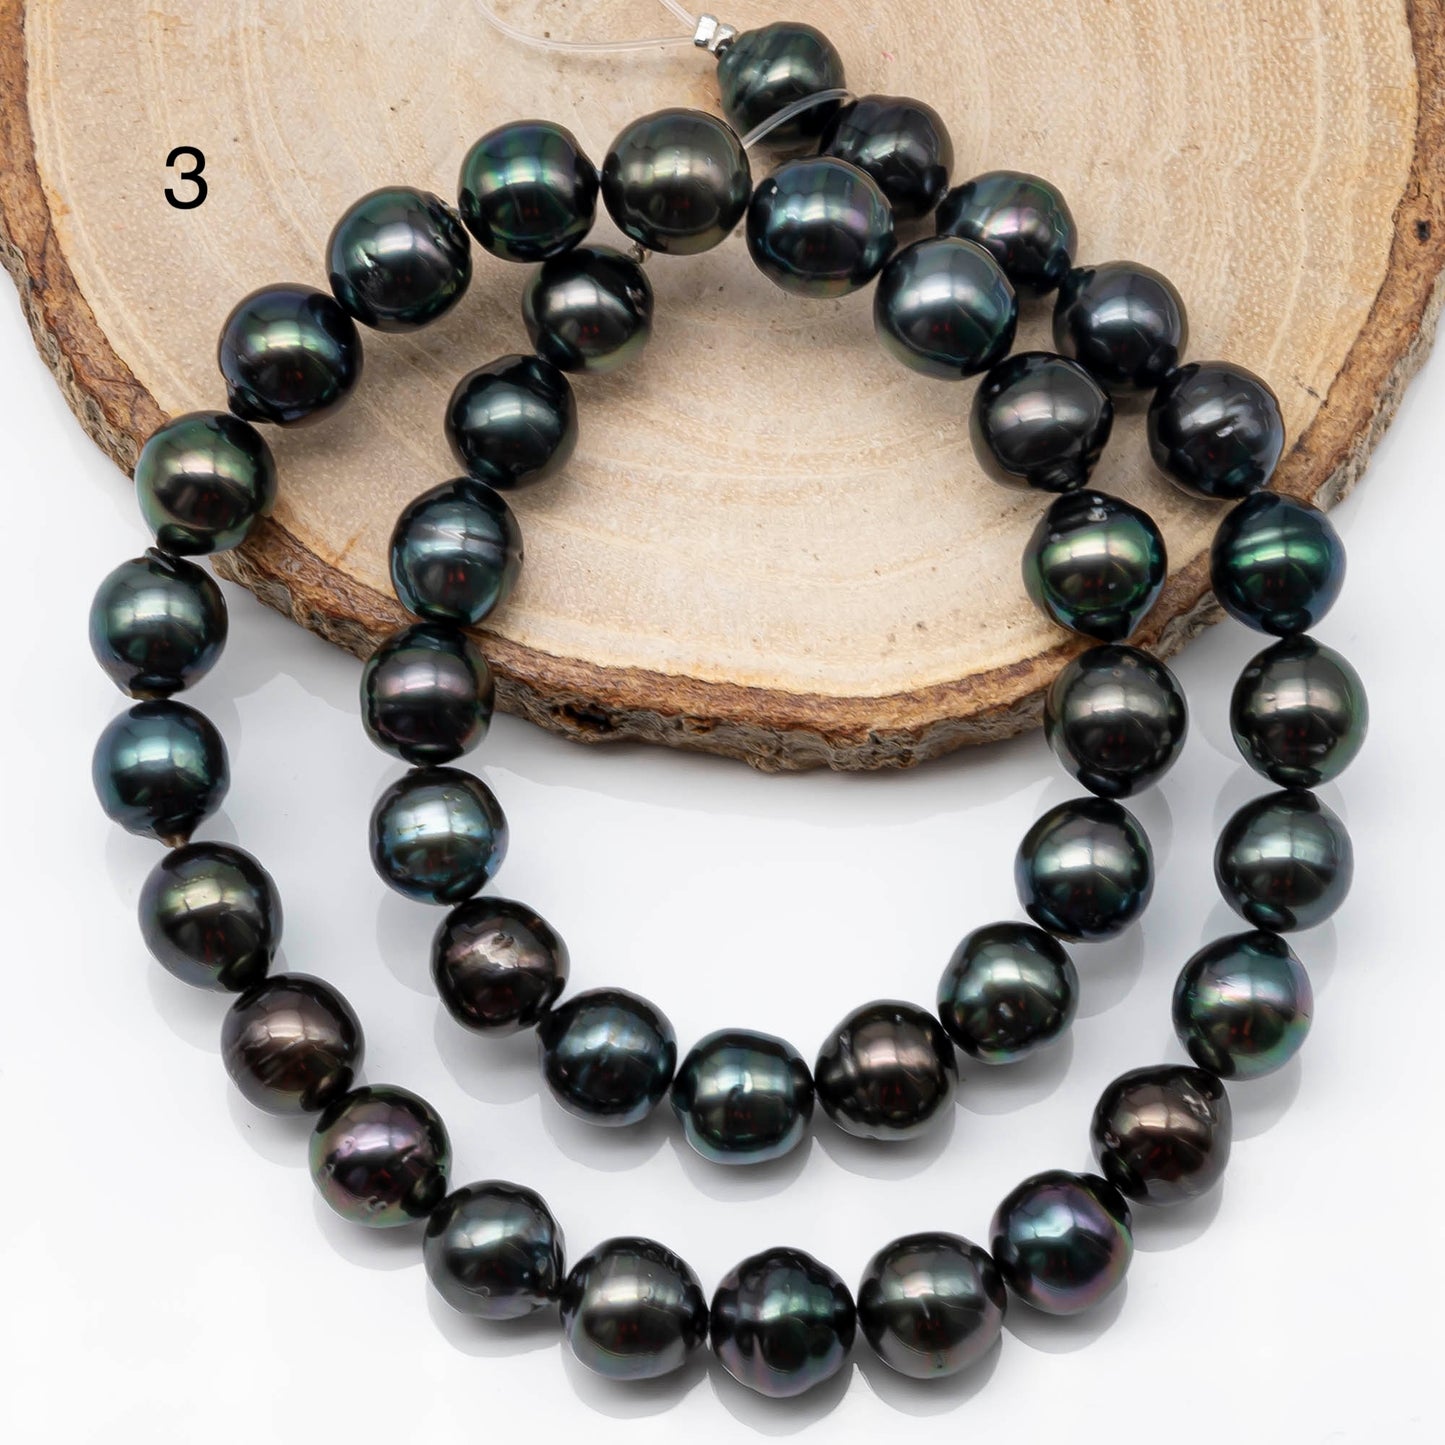 9-10mm Near Round Tahitian Pearl Bead with High Luster, In Full Strand with Blemishes for Jewelry Making, SKU # 1863TH